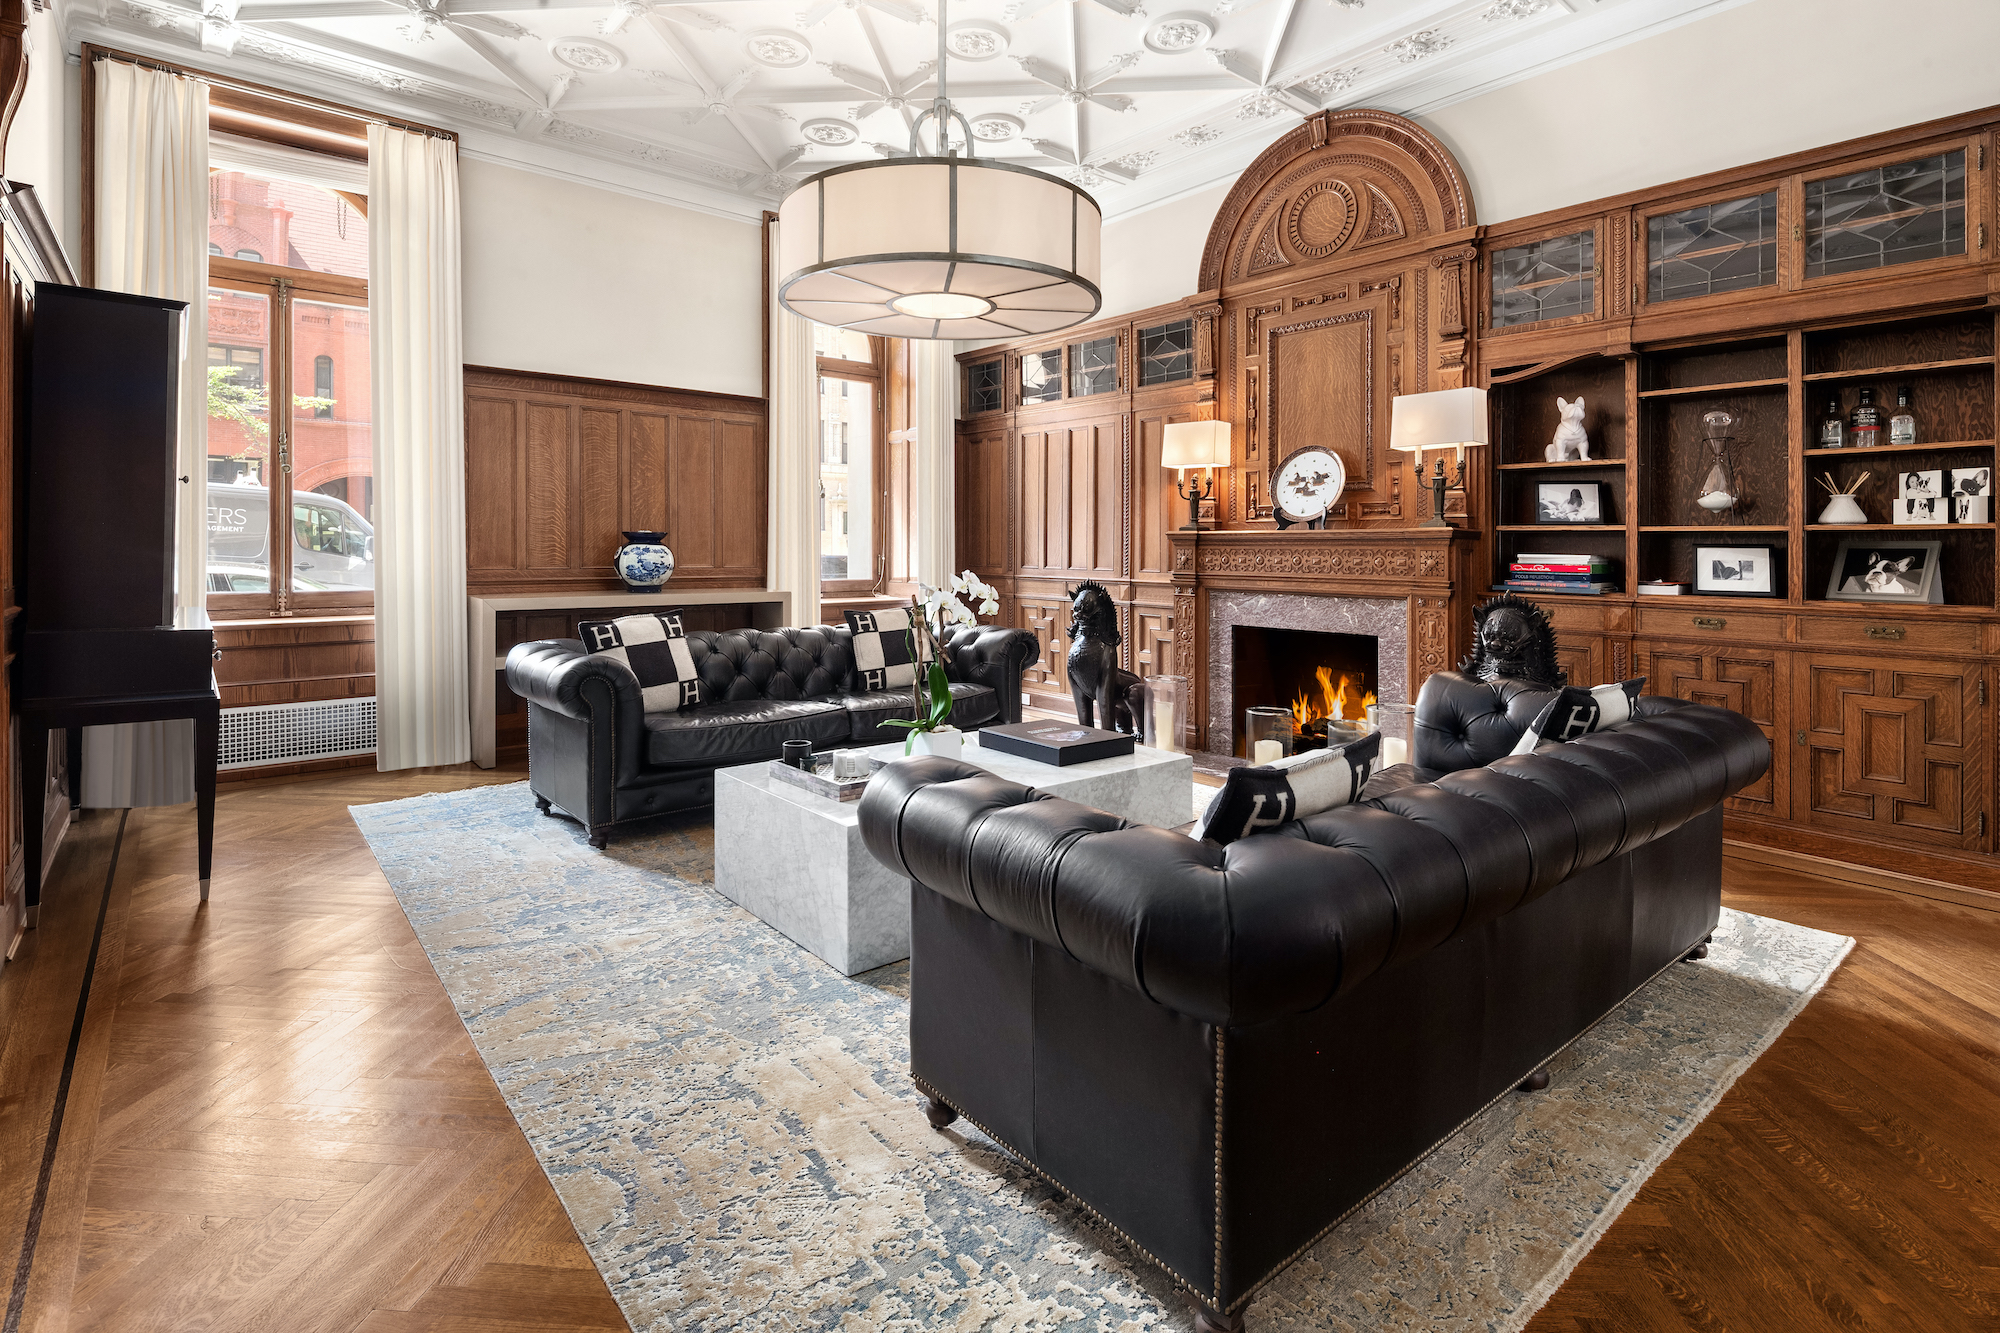 This $9.9M UWS duplex in the landmarked Apthorp is a house-sized condo with a perfect layout